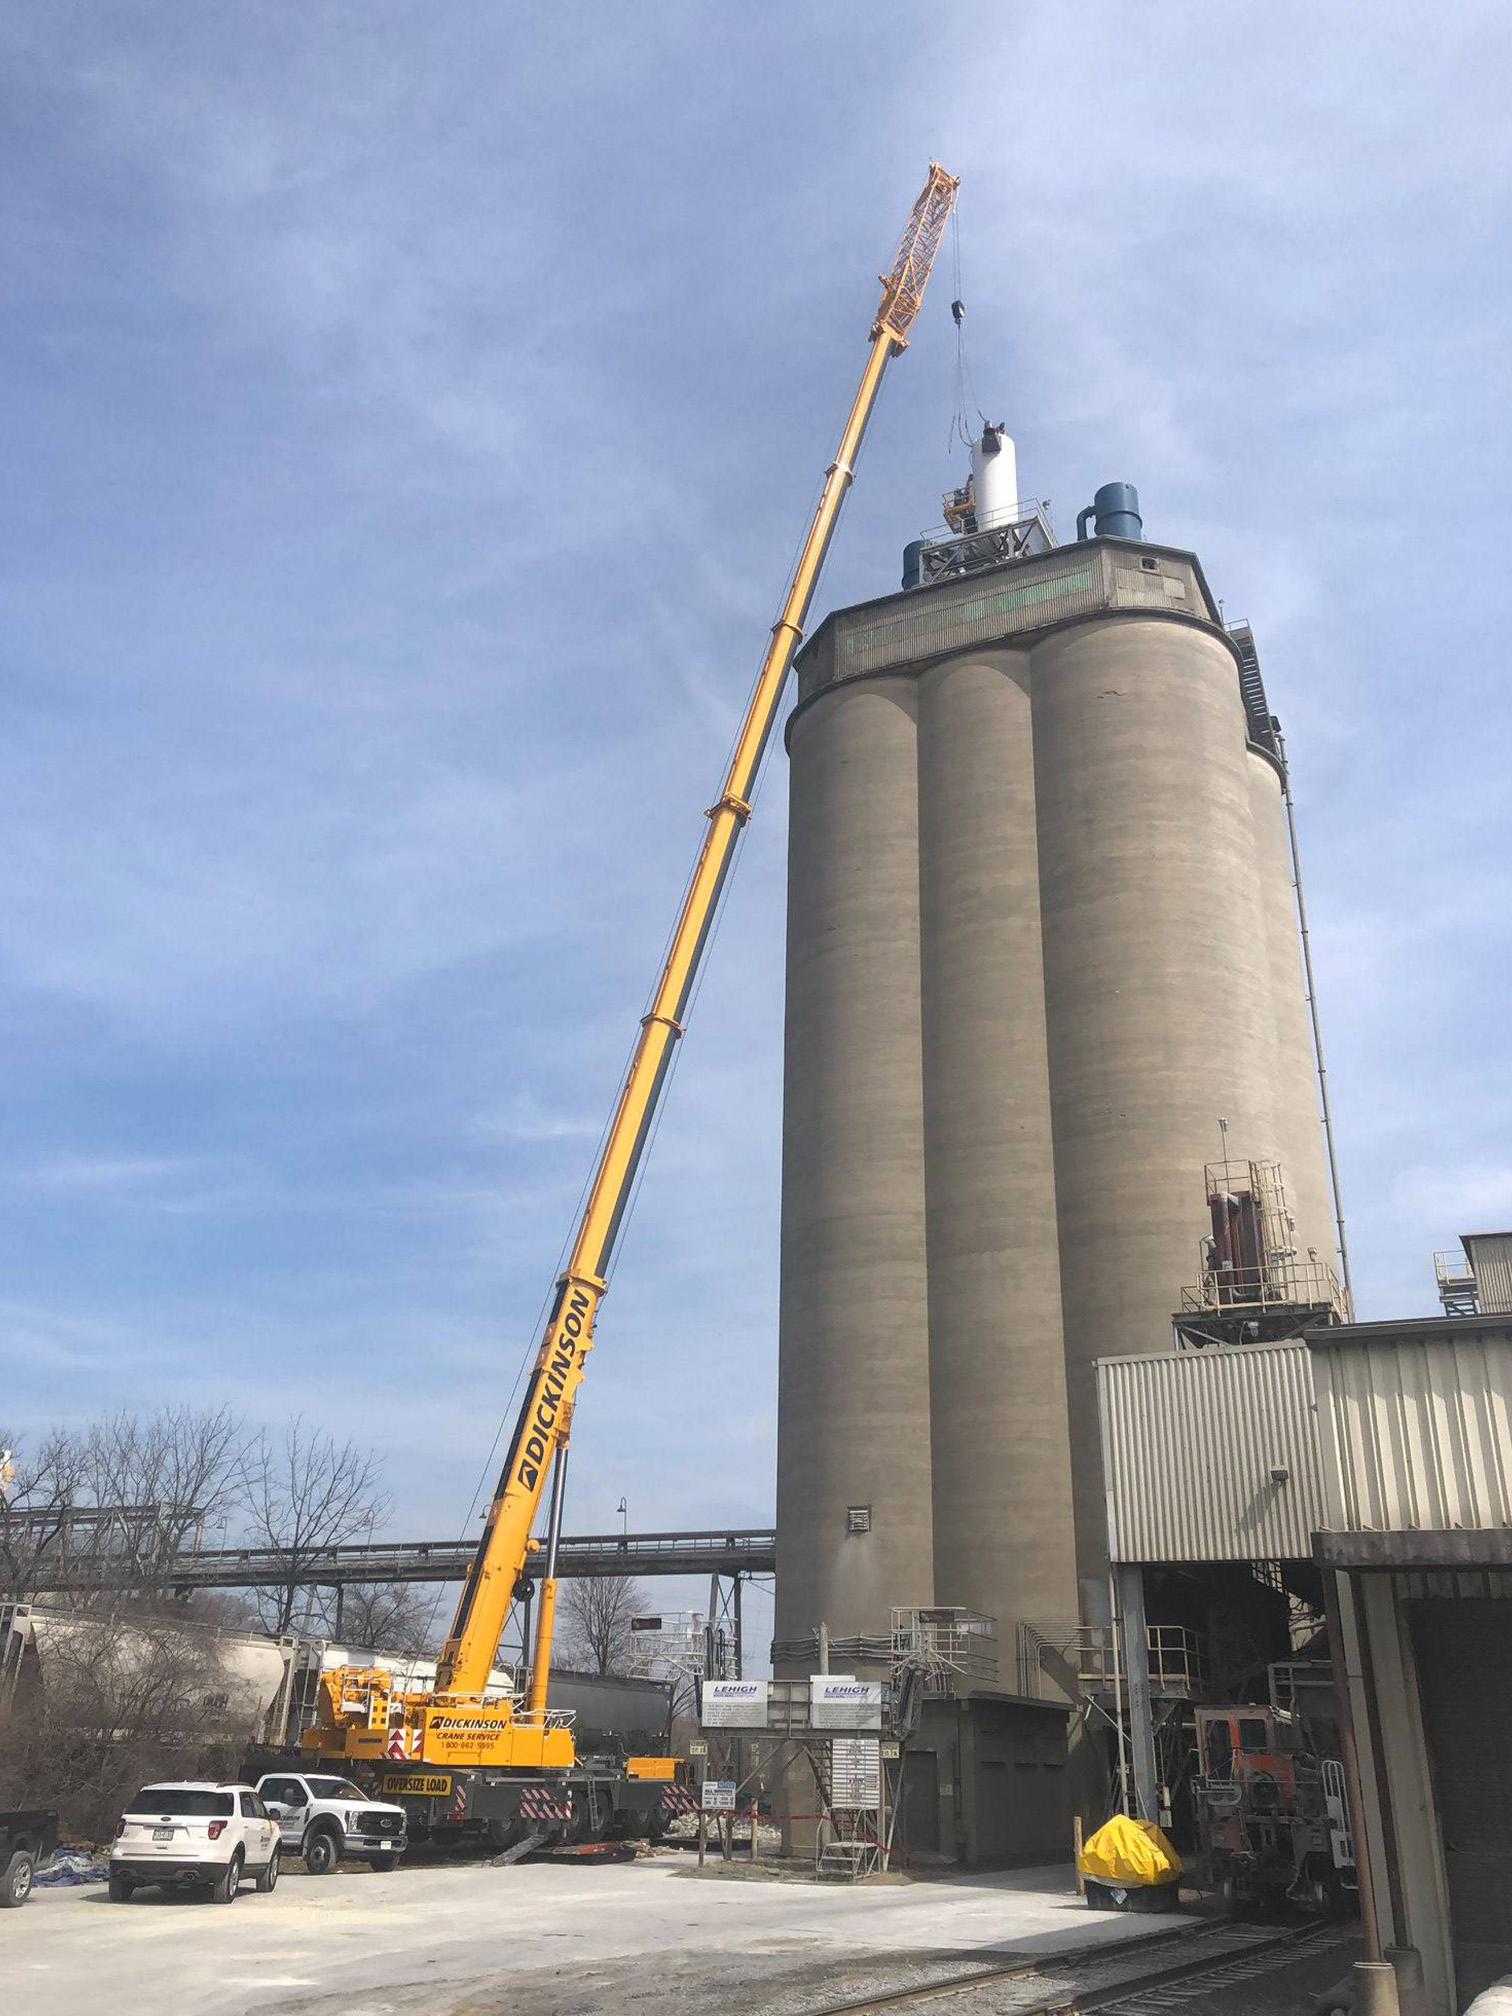 Photo of a crane working at a processing plant